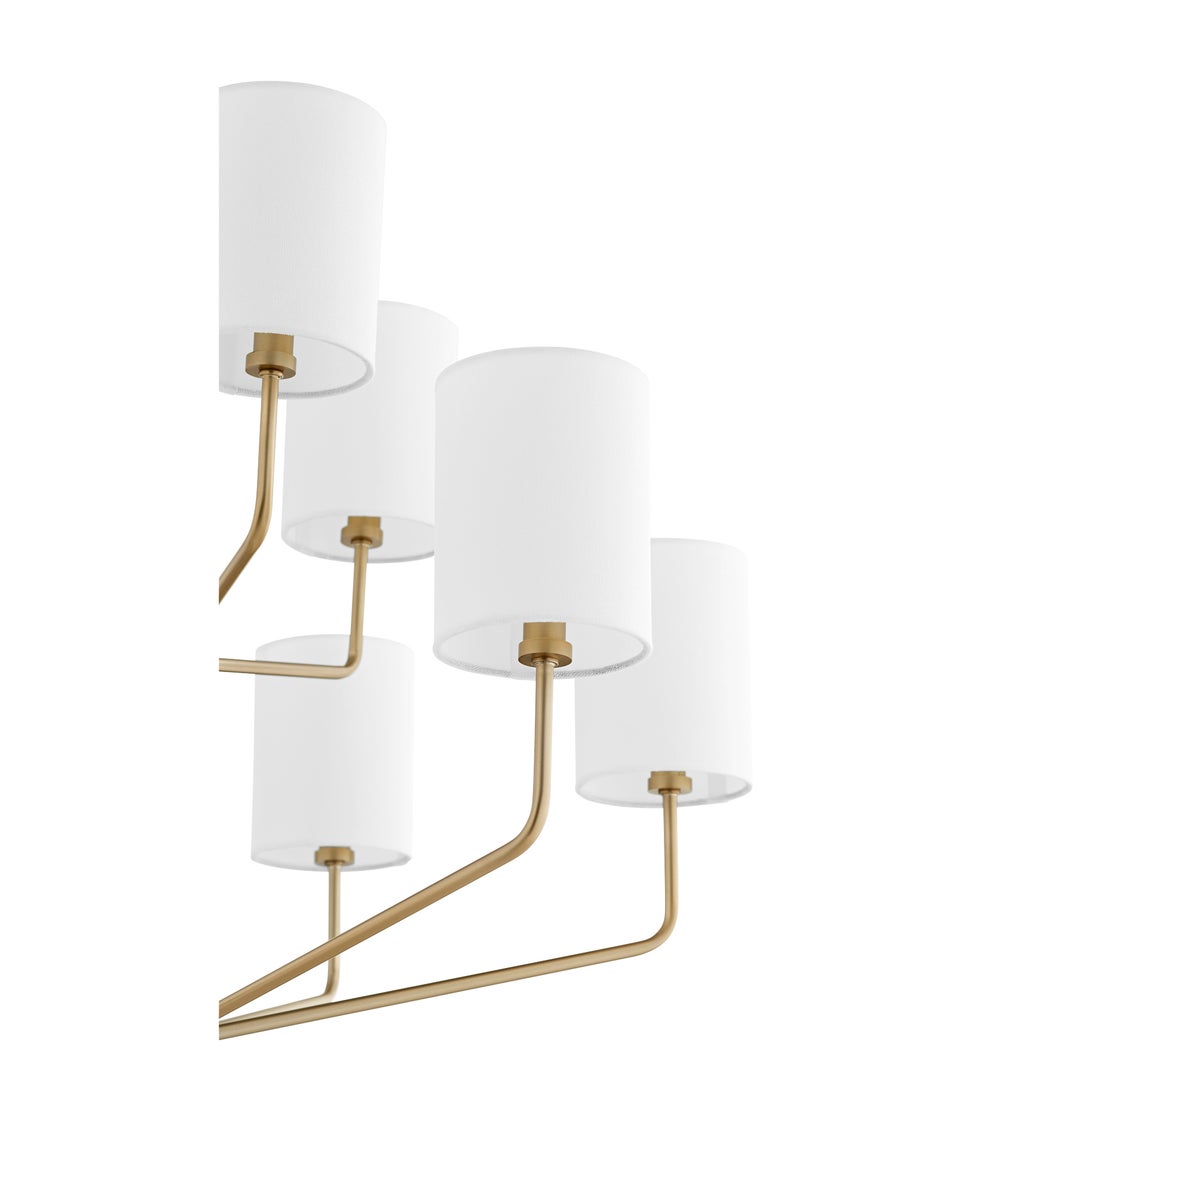 Brass chandelier with rounded angles and bold lines, perfect for indoor kitchens, dining rooms, living rooms, or entry foyers. 9 bulbs, 60W, dimmable. 30"W x 24"H. 2-year warranty.